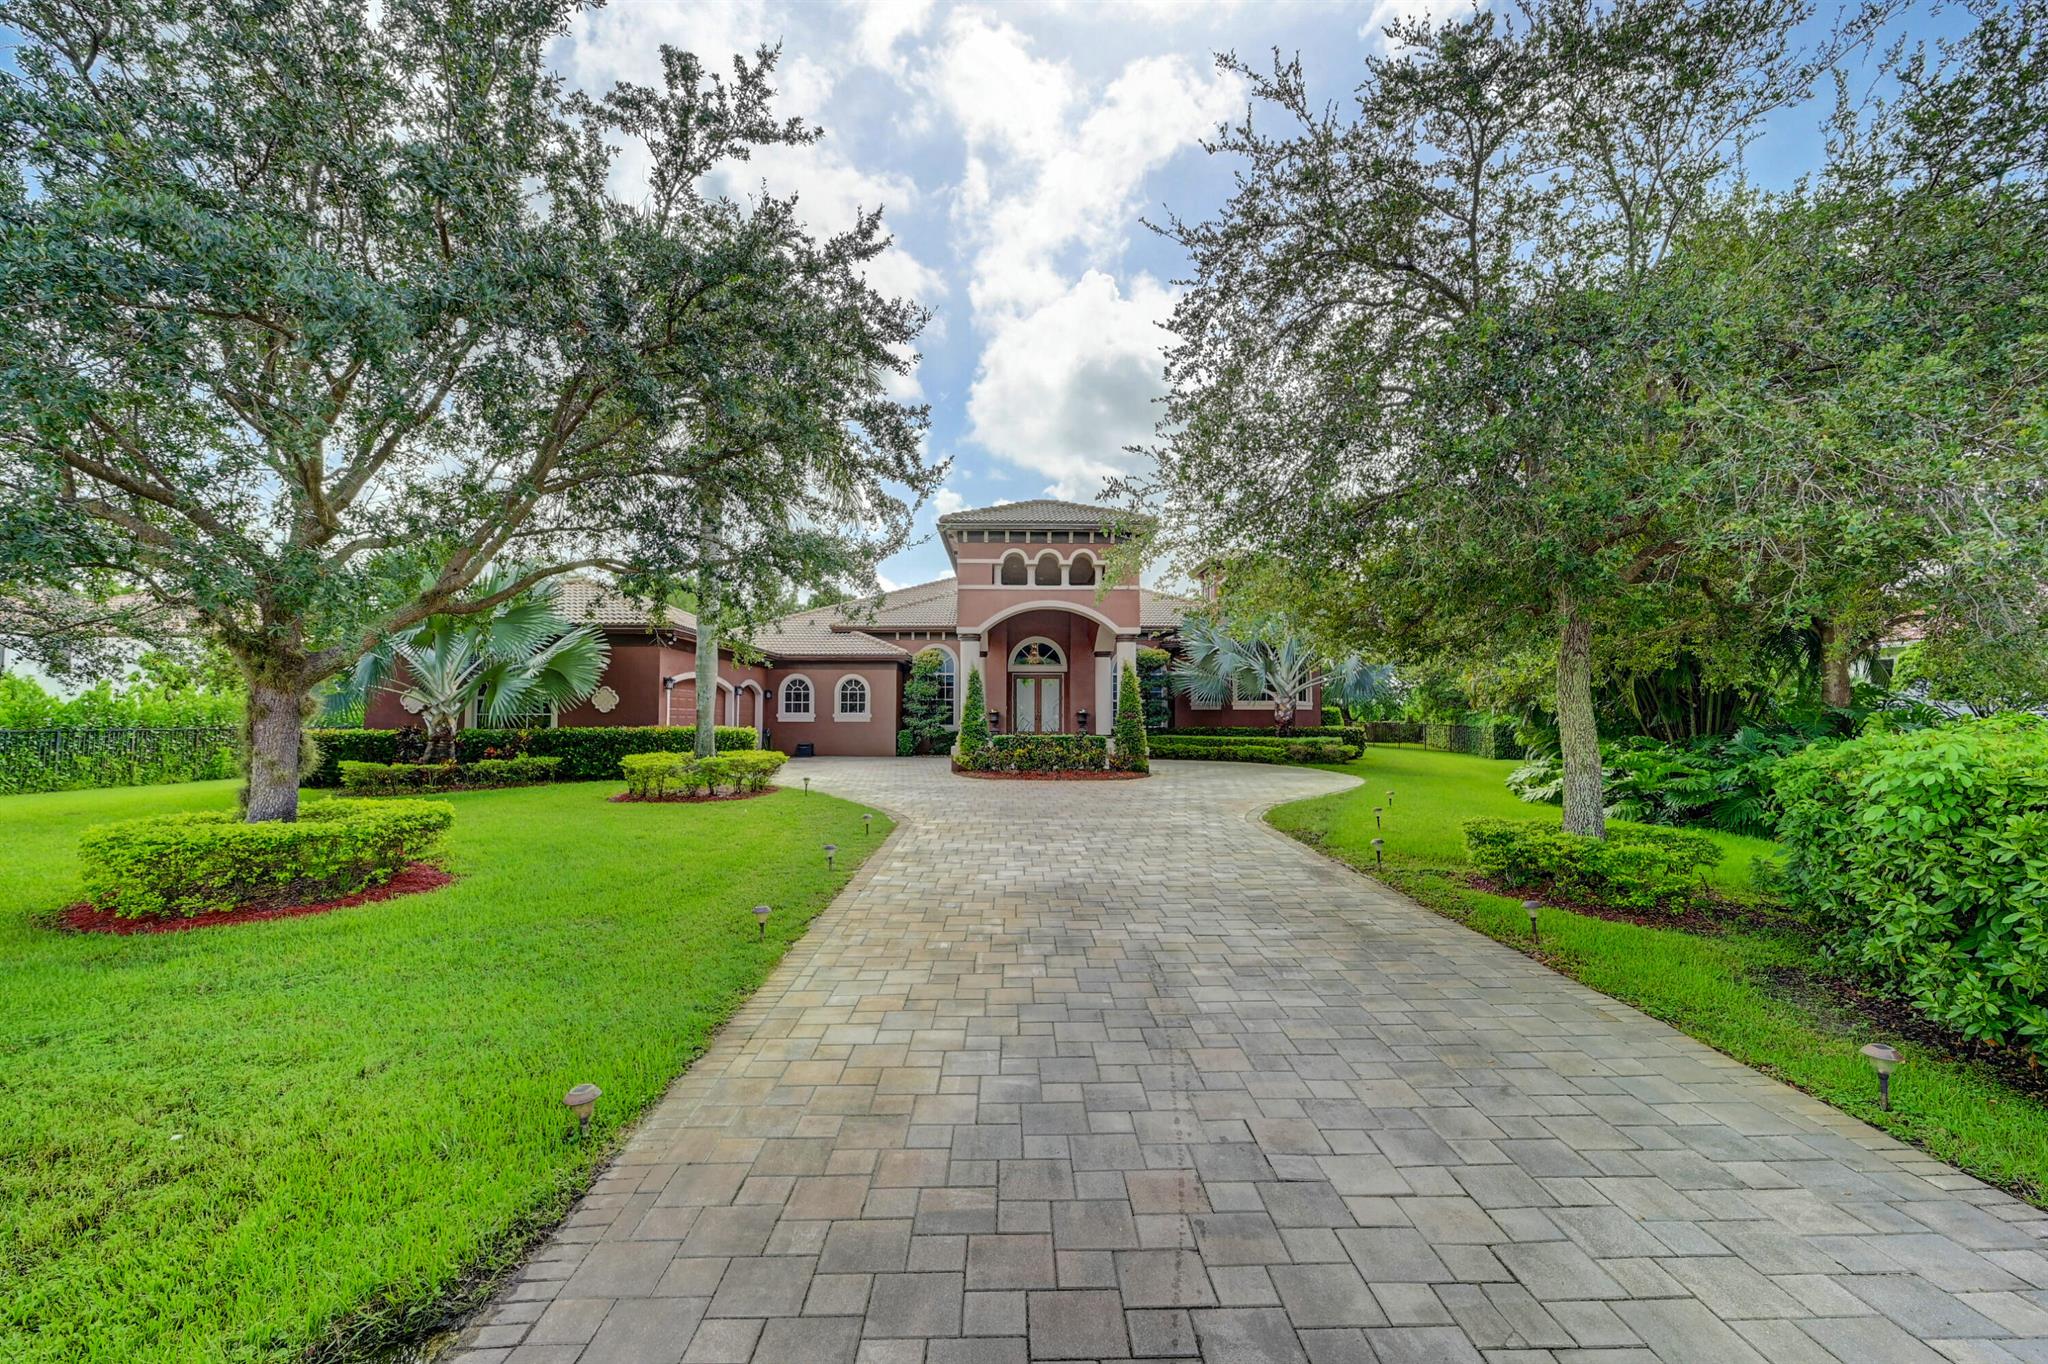 Owner financing up to $500,000 available on this HUGE ESTATE POOL HOME in gated community with a 3-car garage. There are 7 rooms (5 BR, 1 Office with built in bookshelf, 1 Media Rm (currently used as a 6th bedroom with private living room), plus Master has 2nd office overlooking pool area) plus 5 1/2 baths. The free form pool in a fenced back yard has a paver patio that feeds into 2 covered outdoor living spaces. The interior boasts plenty of natural light, a grand entry, 16ft volume ceilings with crown moldings, 21ft dining rm, an open concept Tri-Split floor plan (3 wings each with their own A/C units) & oversized bedrooms with on-suites.  New water heater 2020, pool and sprinkler pumps upgraded 2022-2023. All Appliances are fully functional and are covered by a home warranty company.